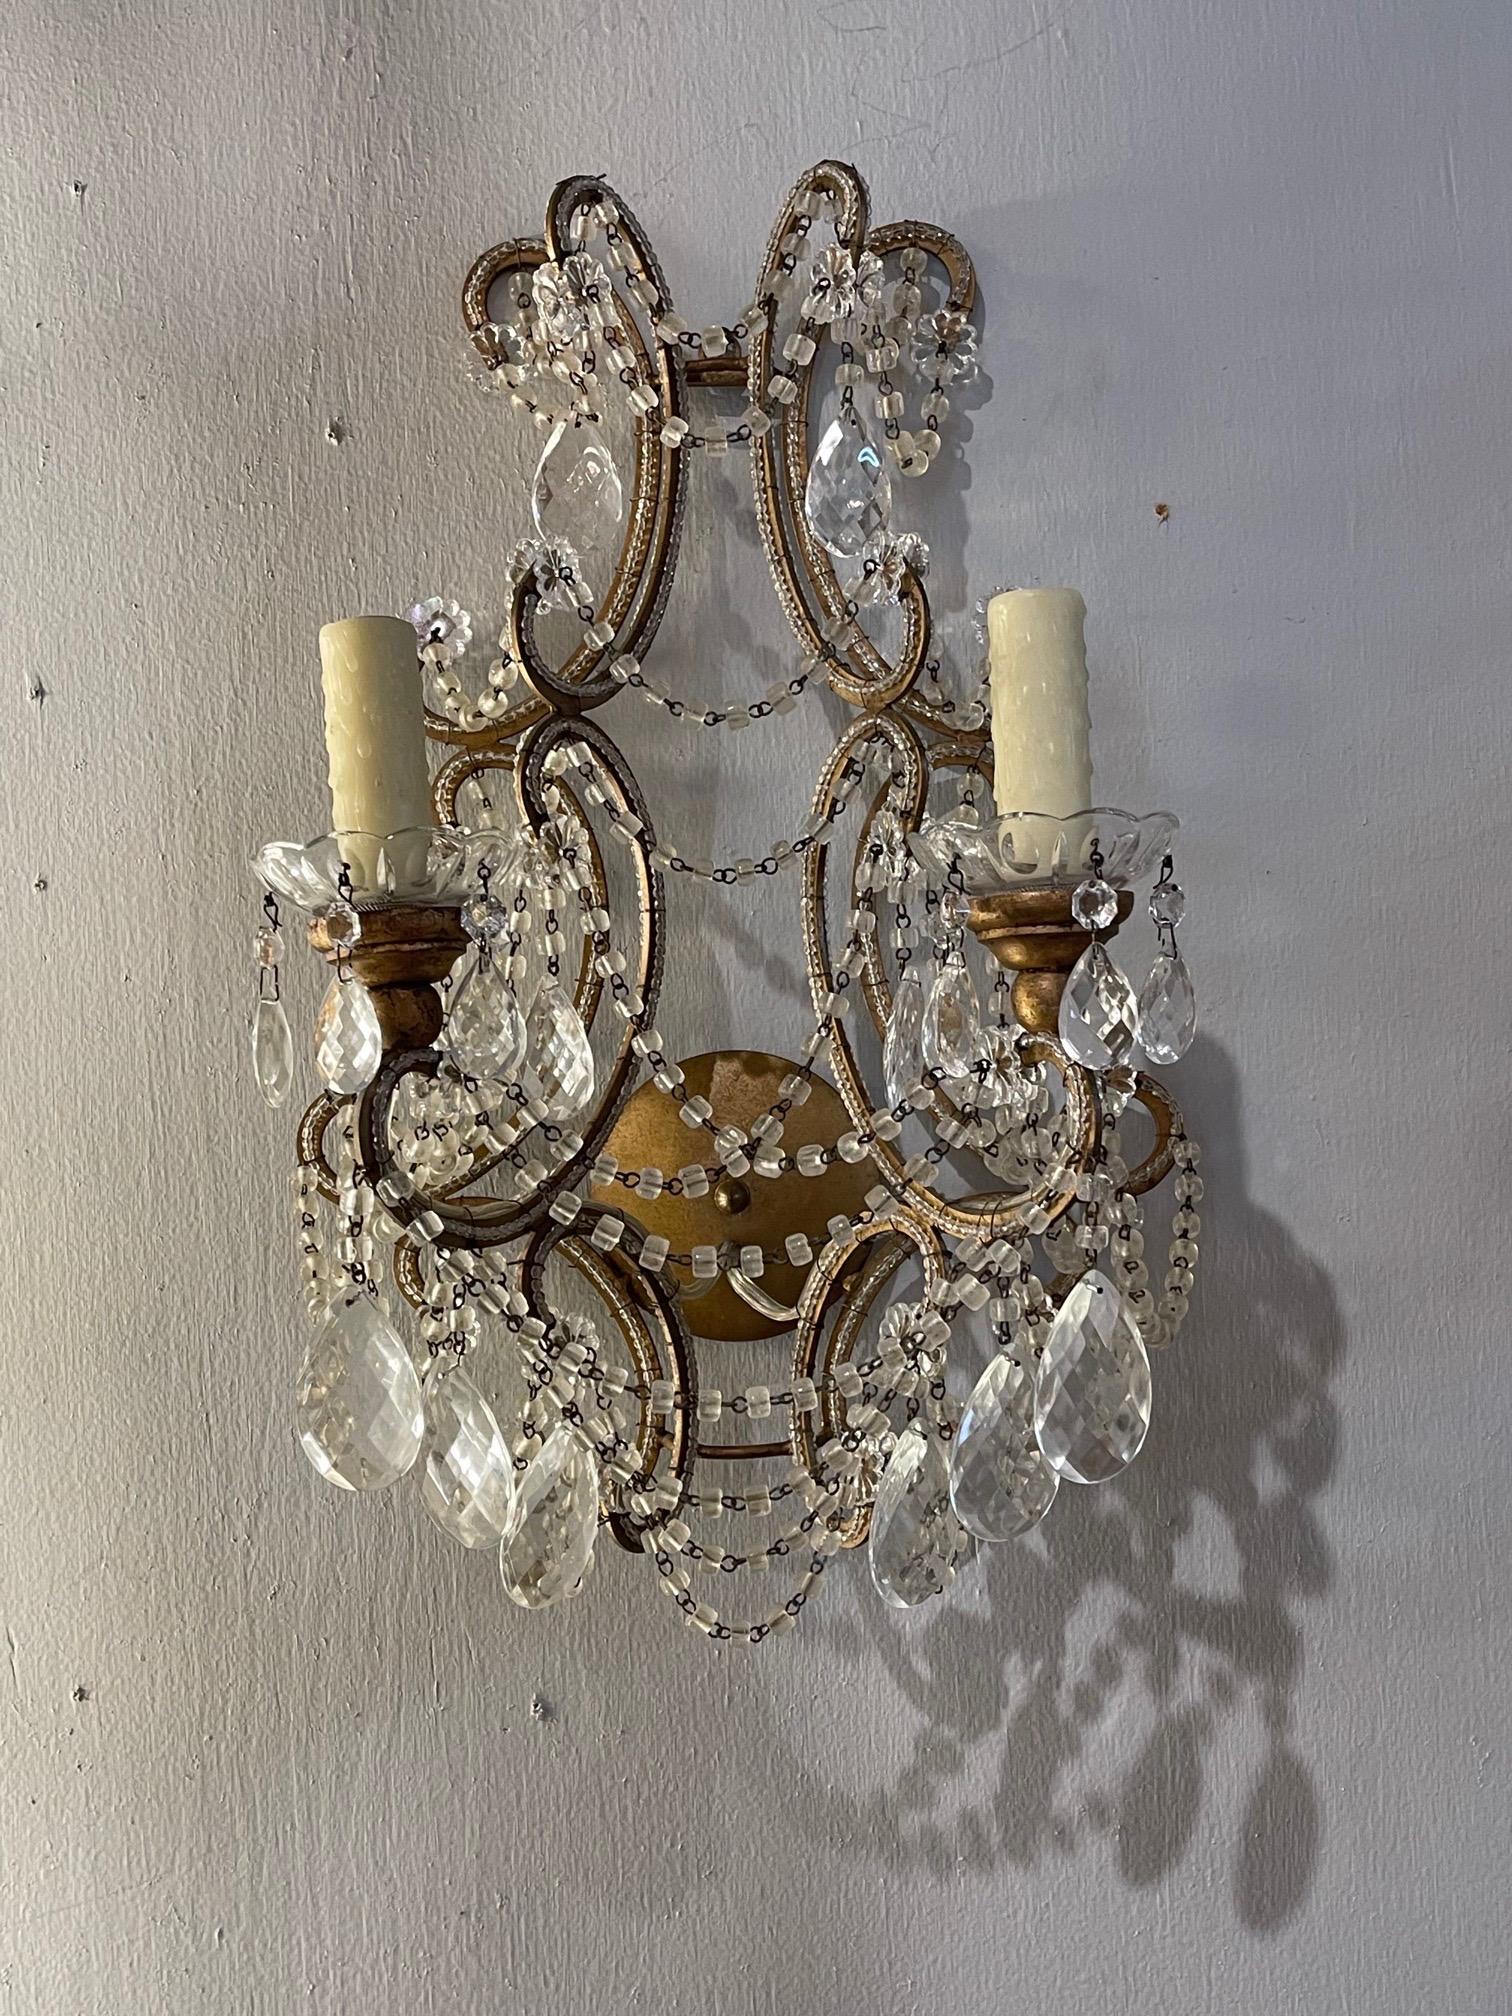 Nice pair of early 20th century Italian beaded 2 light wall sconces. Covered with beautiful crystals on an pretty decorative base. Creates an elegant look!